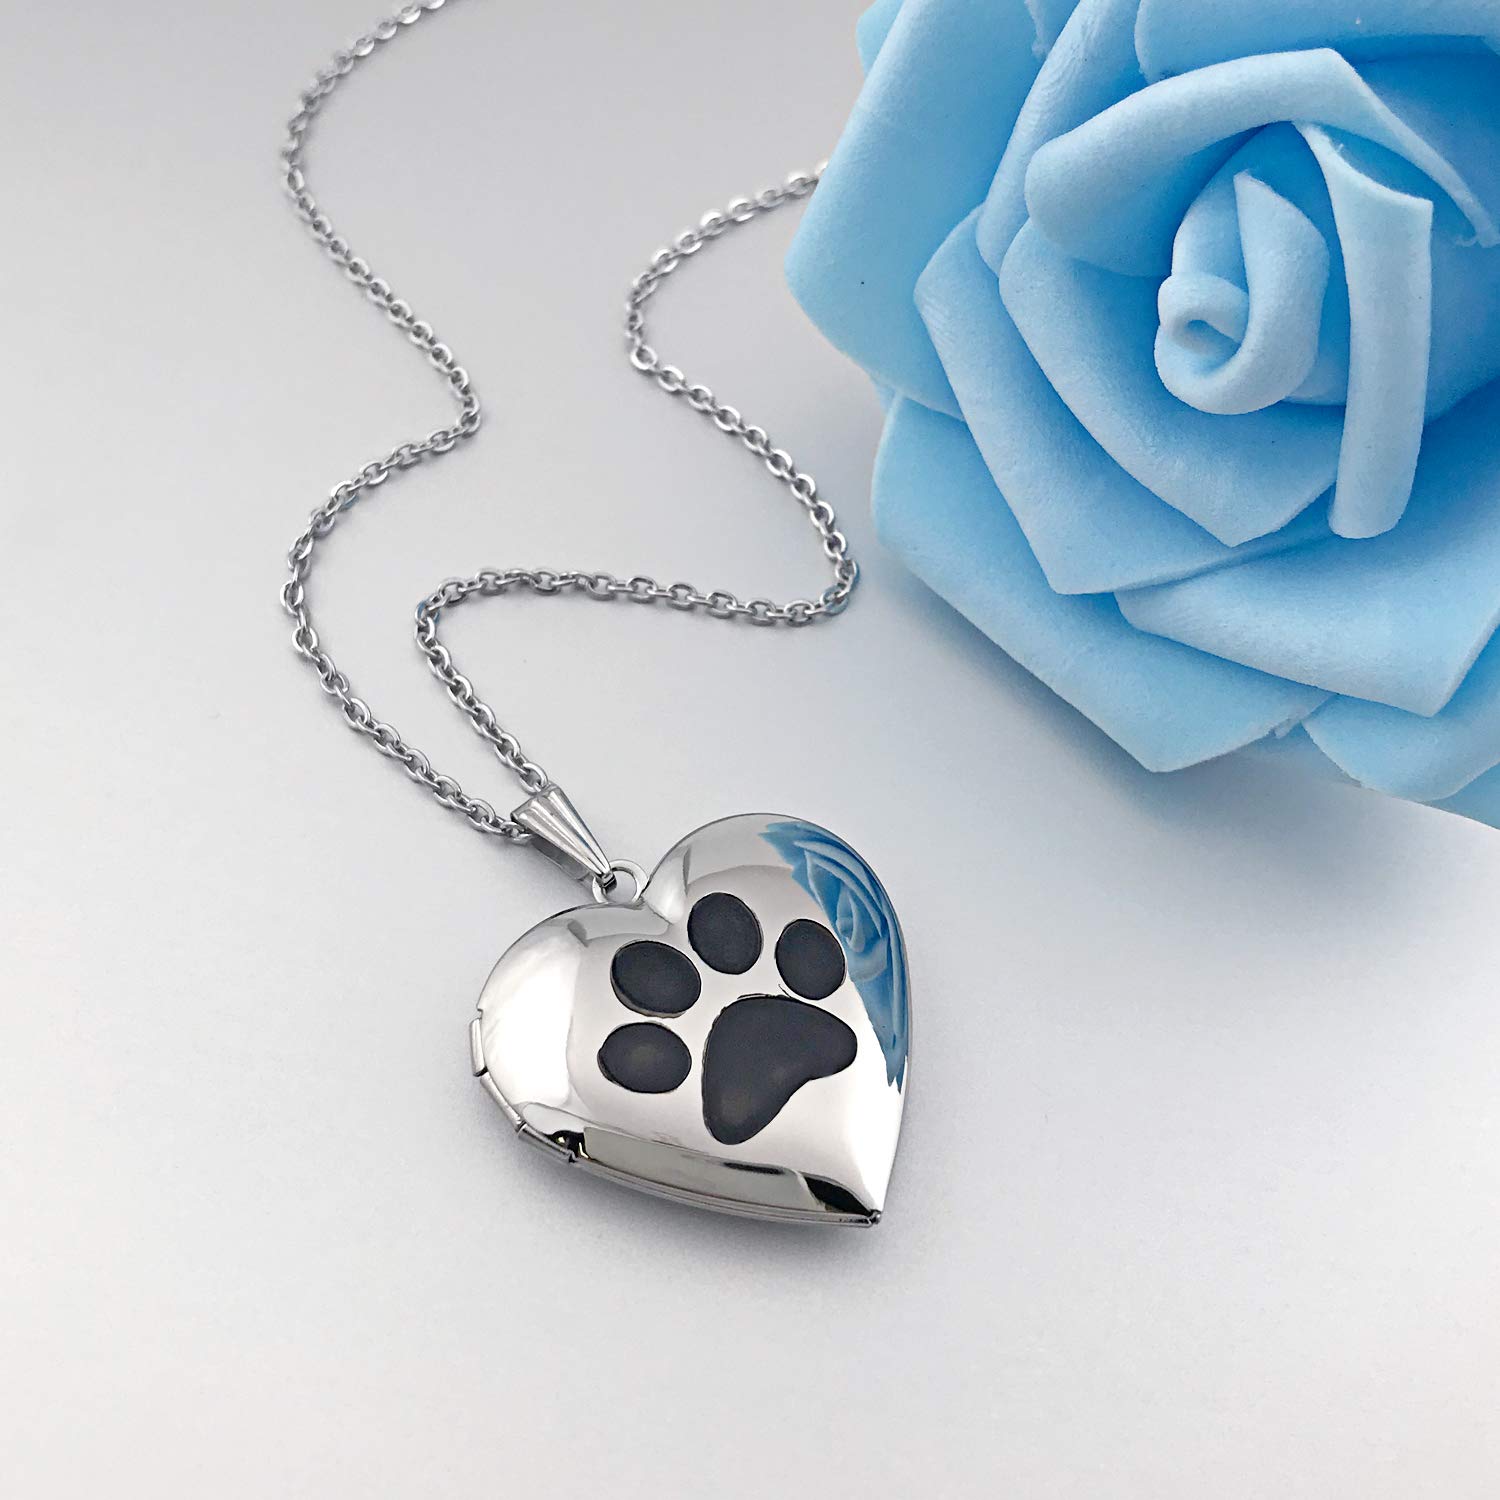 YOUFENG Dog Paw Locket Necklace that Holds Pictures Love Heart Photo Locket Crystals Necklace Pendant Birthday Gifts